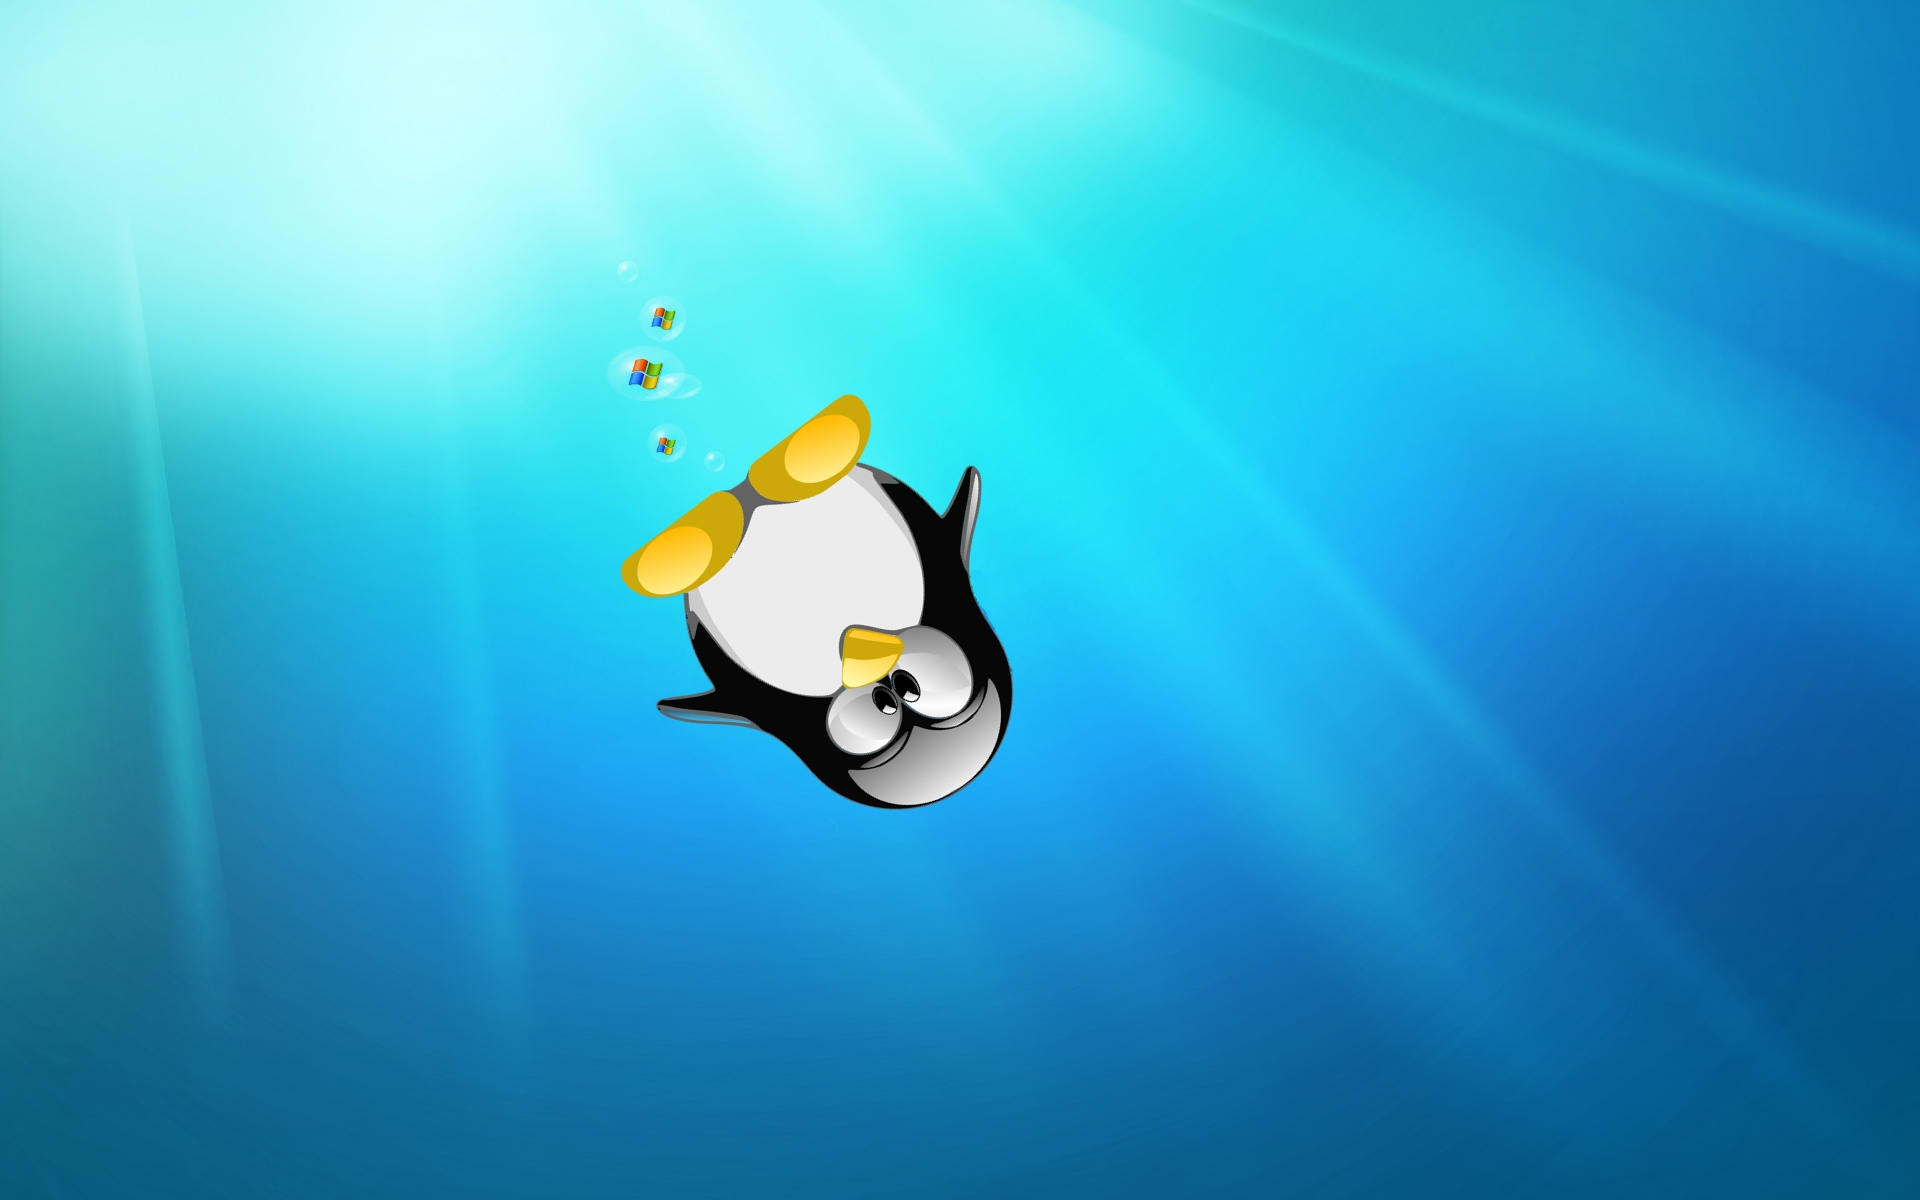 To Watch The Top Awesome Windows Linux Wallpaper Click Here